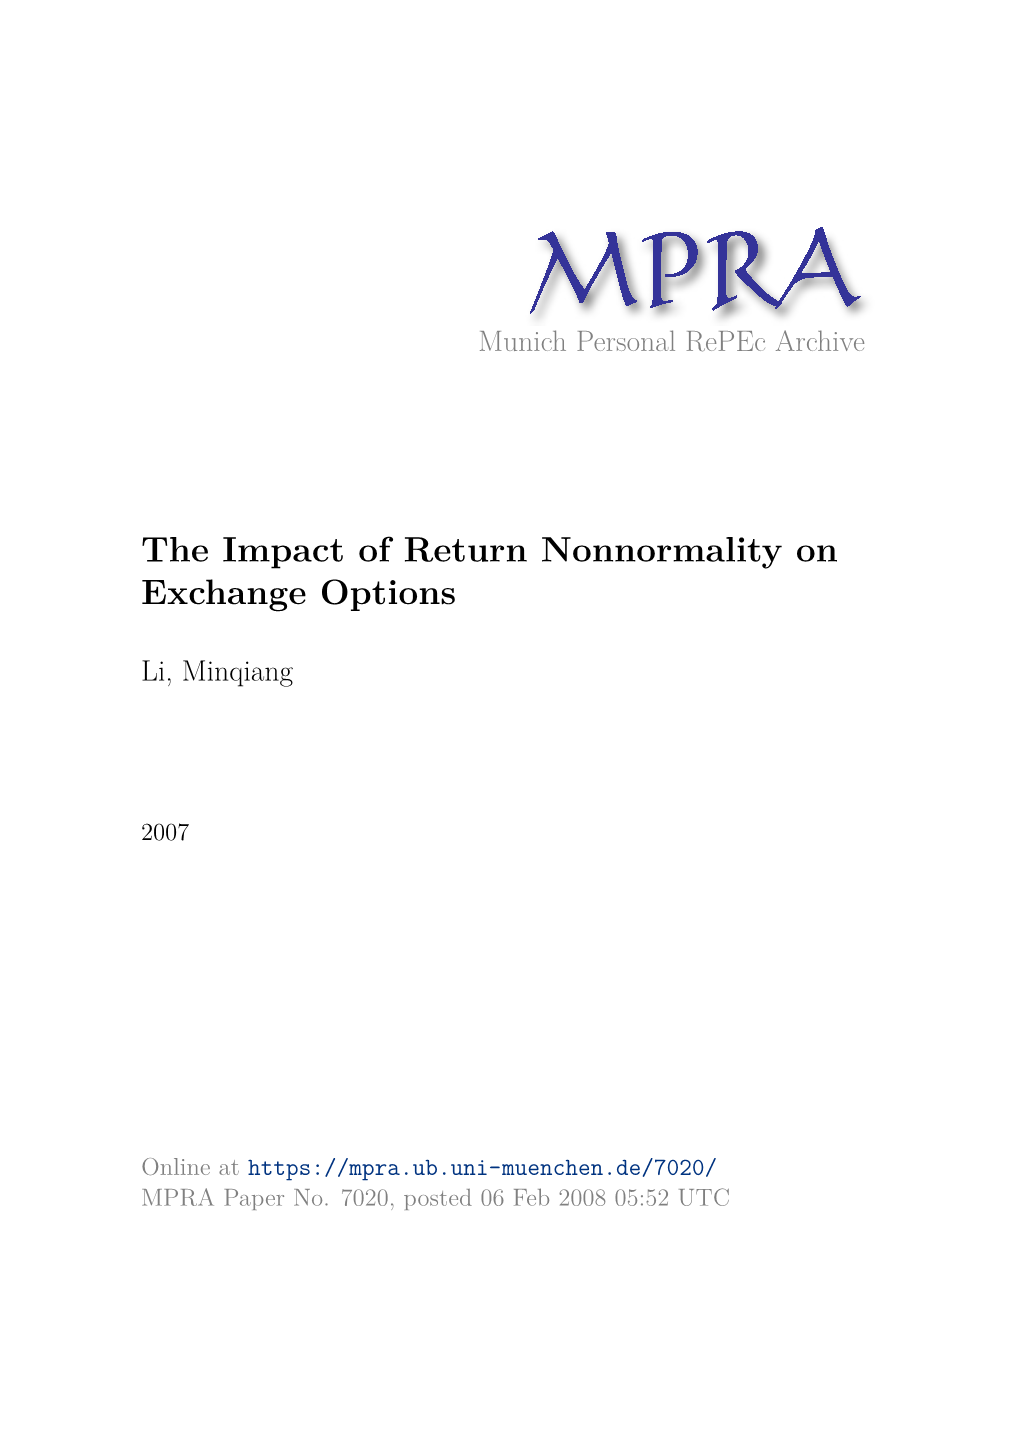 The Impact of Return Nonnormality on Exchange Options